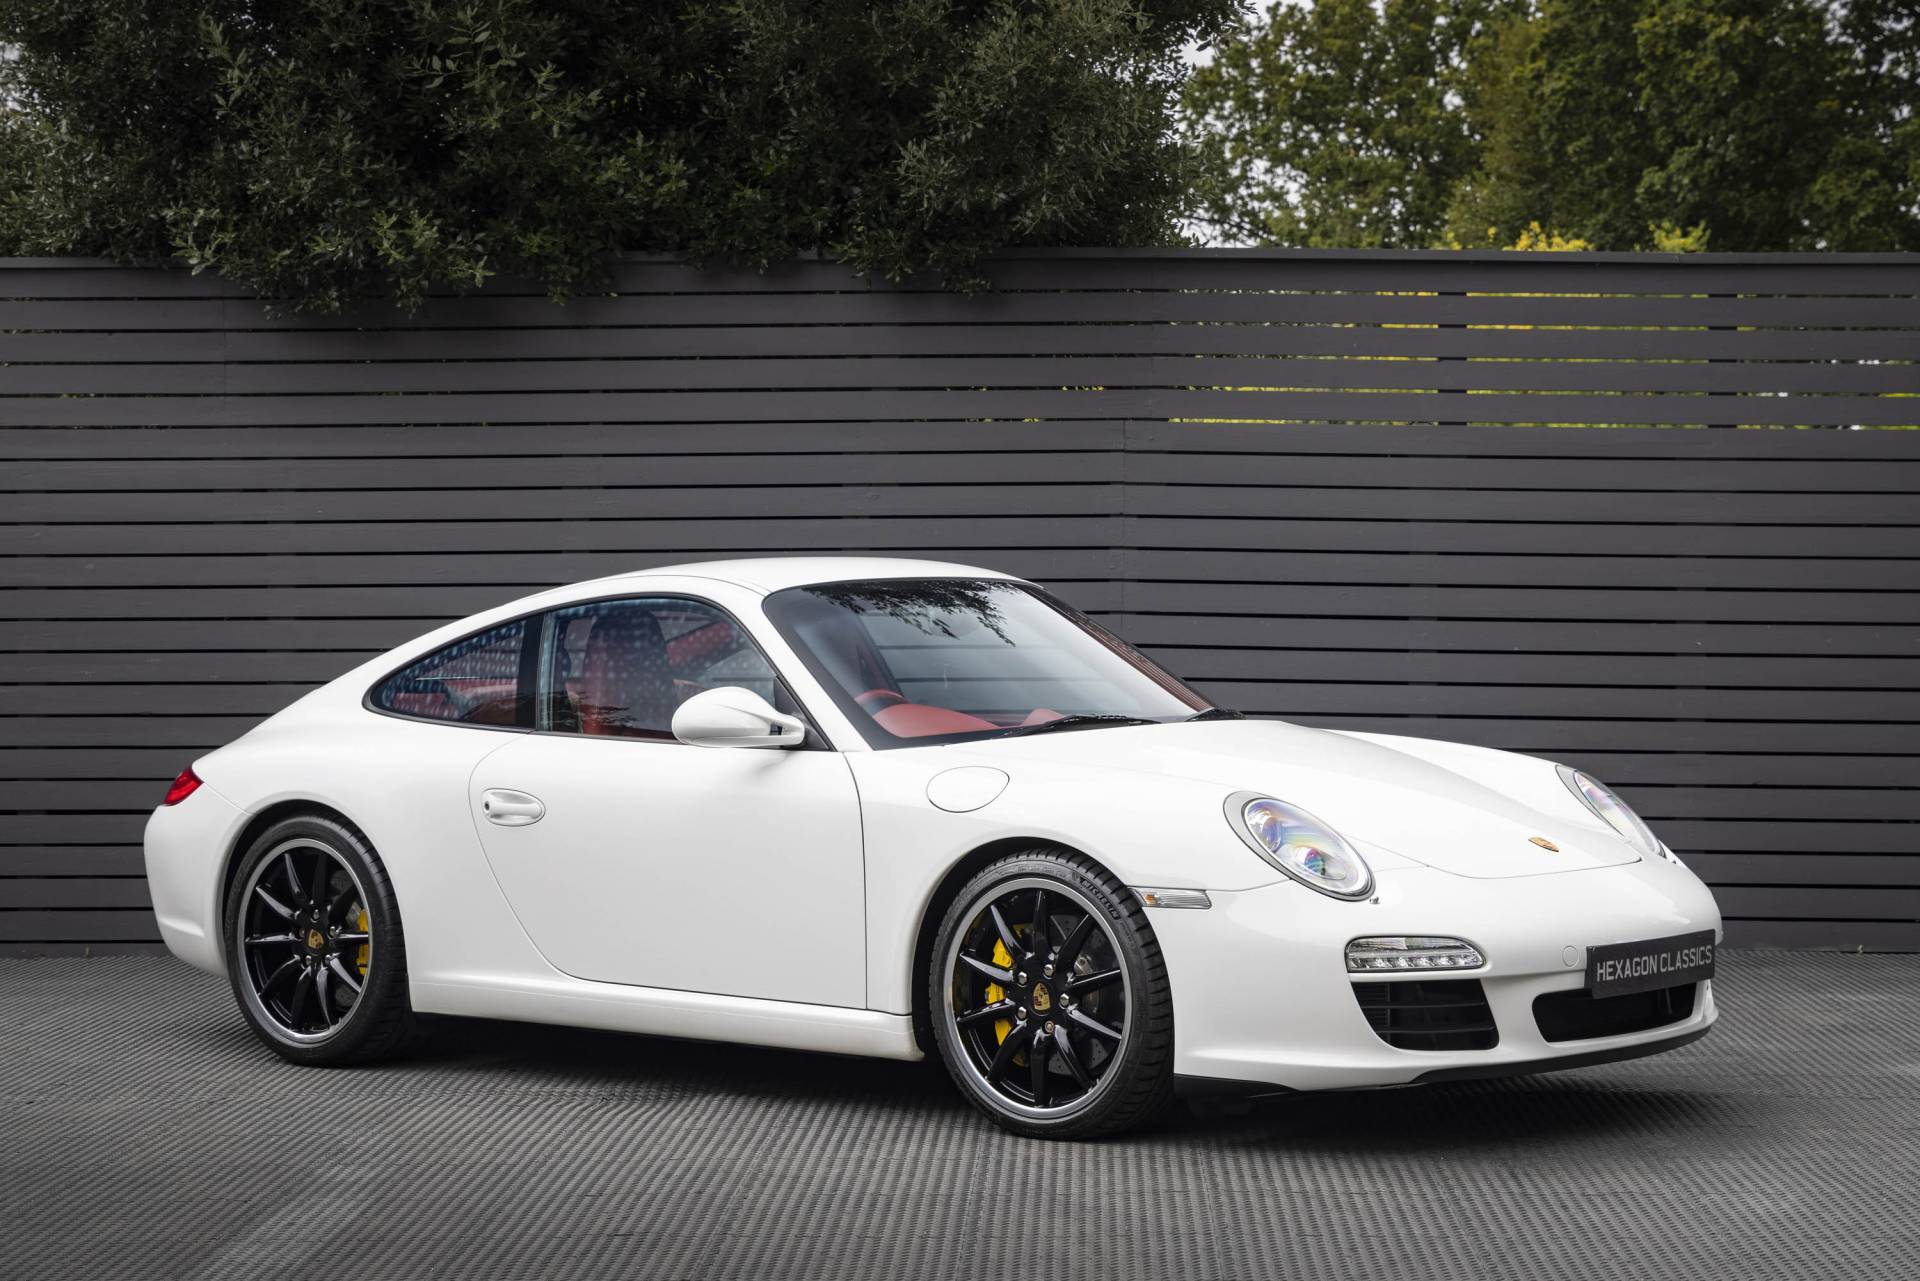 For Sale: Porsche 911 Carrera S (2011) offered for $128,909